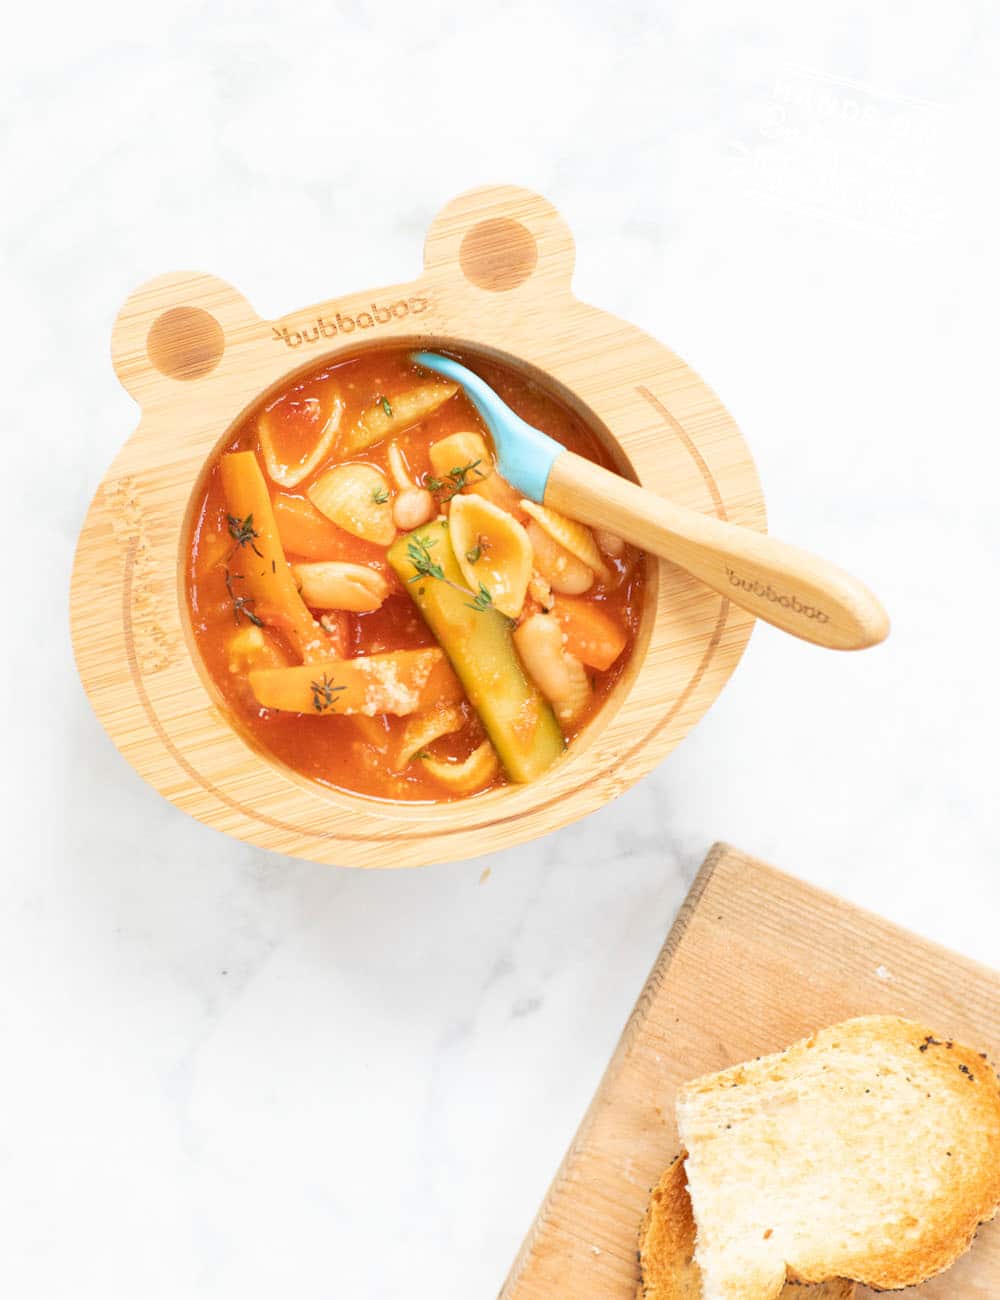 Warm Baby Led Weaning friendly veggie minestrone soup. Cutting veggies correctly for babies is the key to making this soup baby friendly! #soup #babyledweaning #vegan #vegetarian